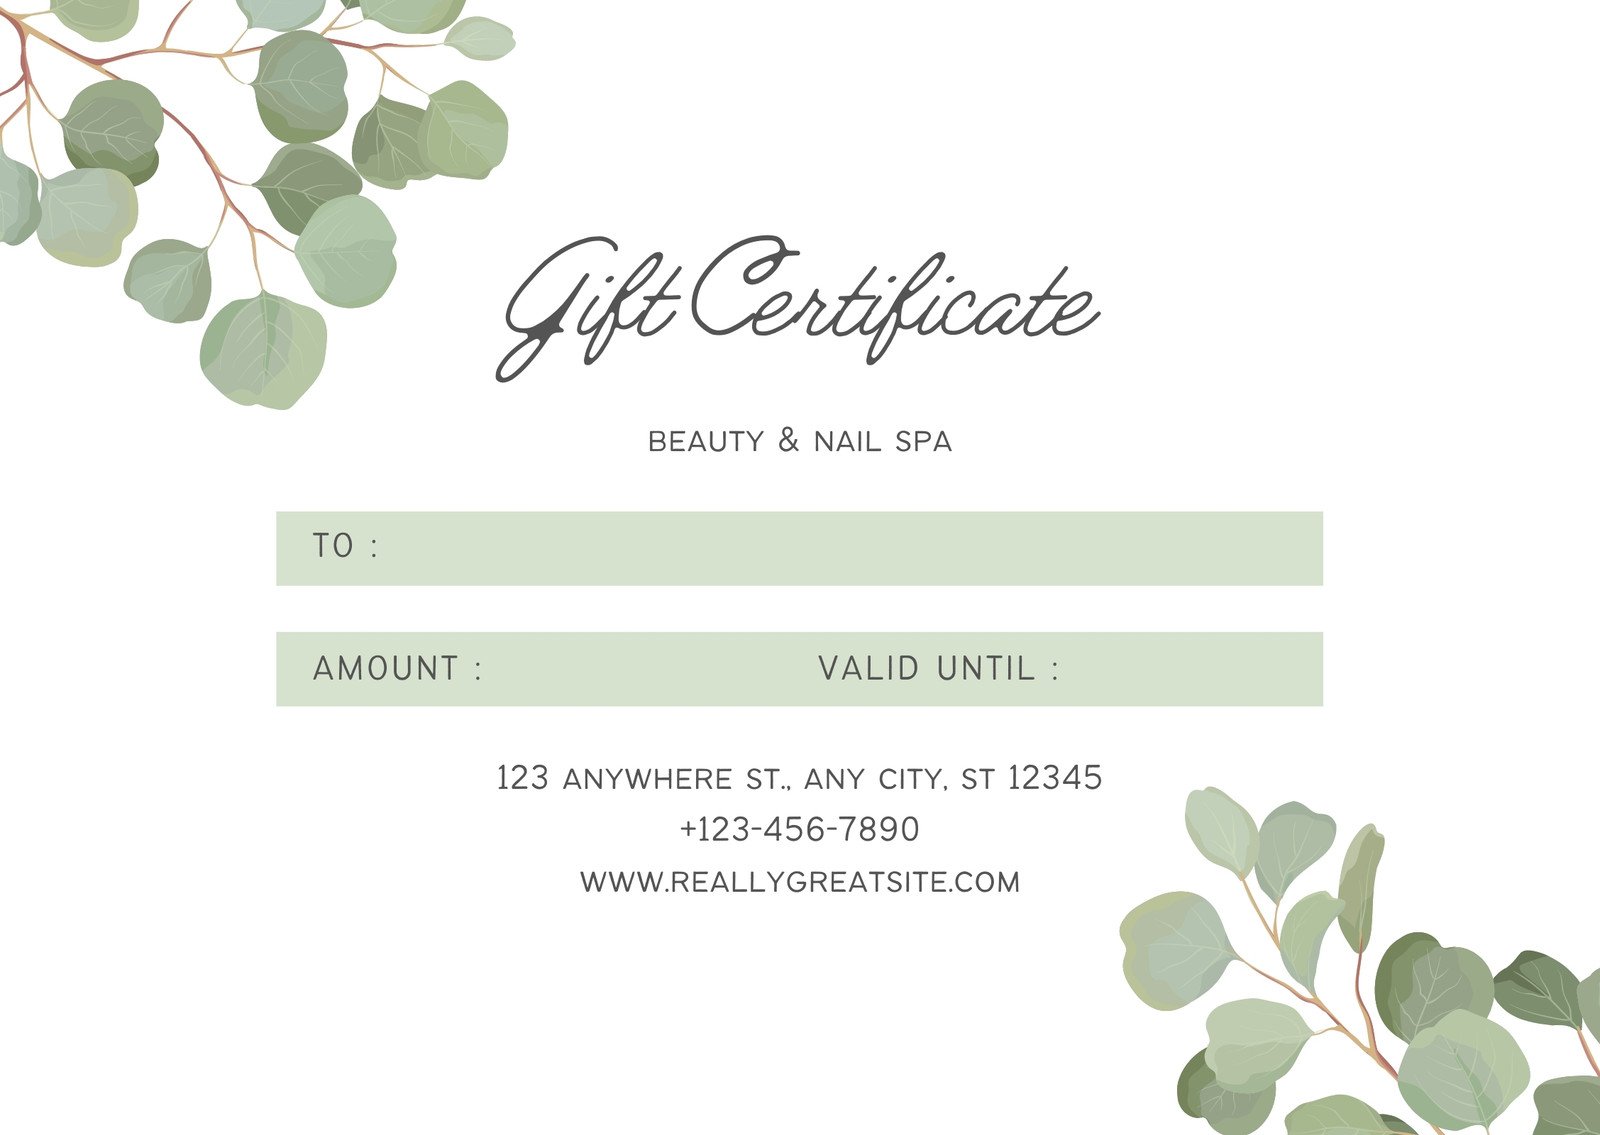 Printable Massage Gift Certificate Template